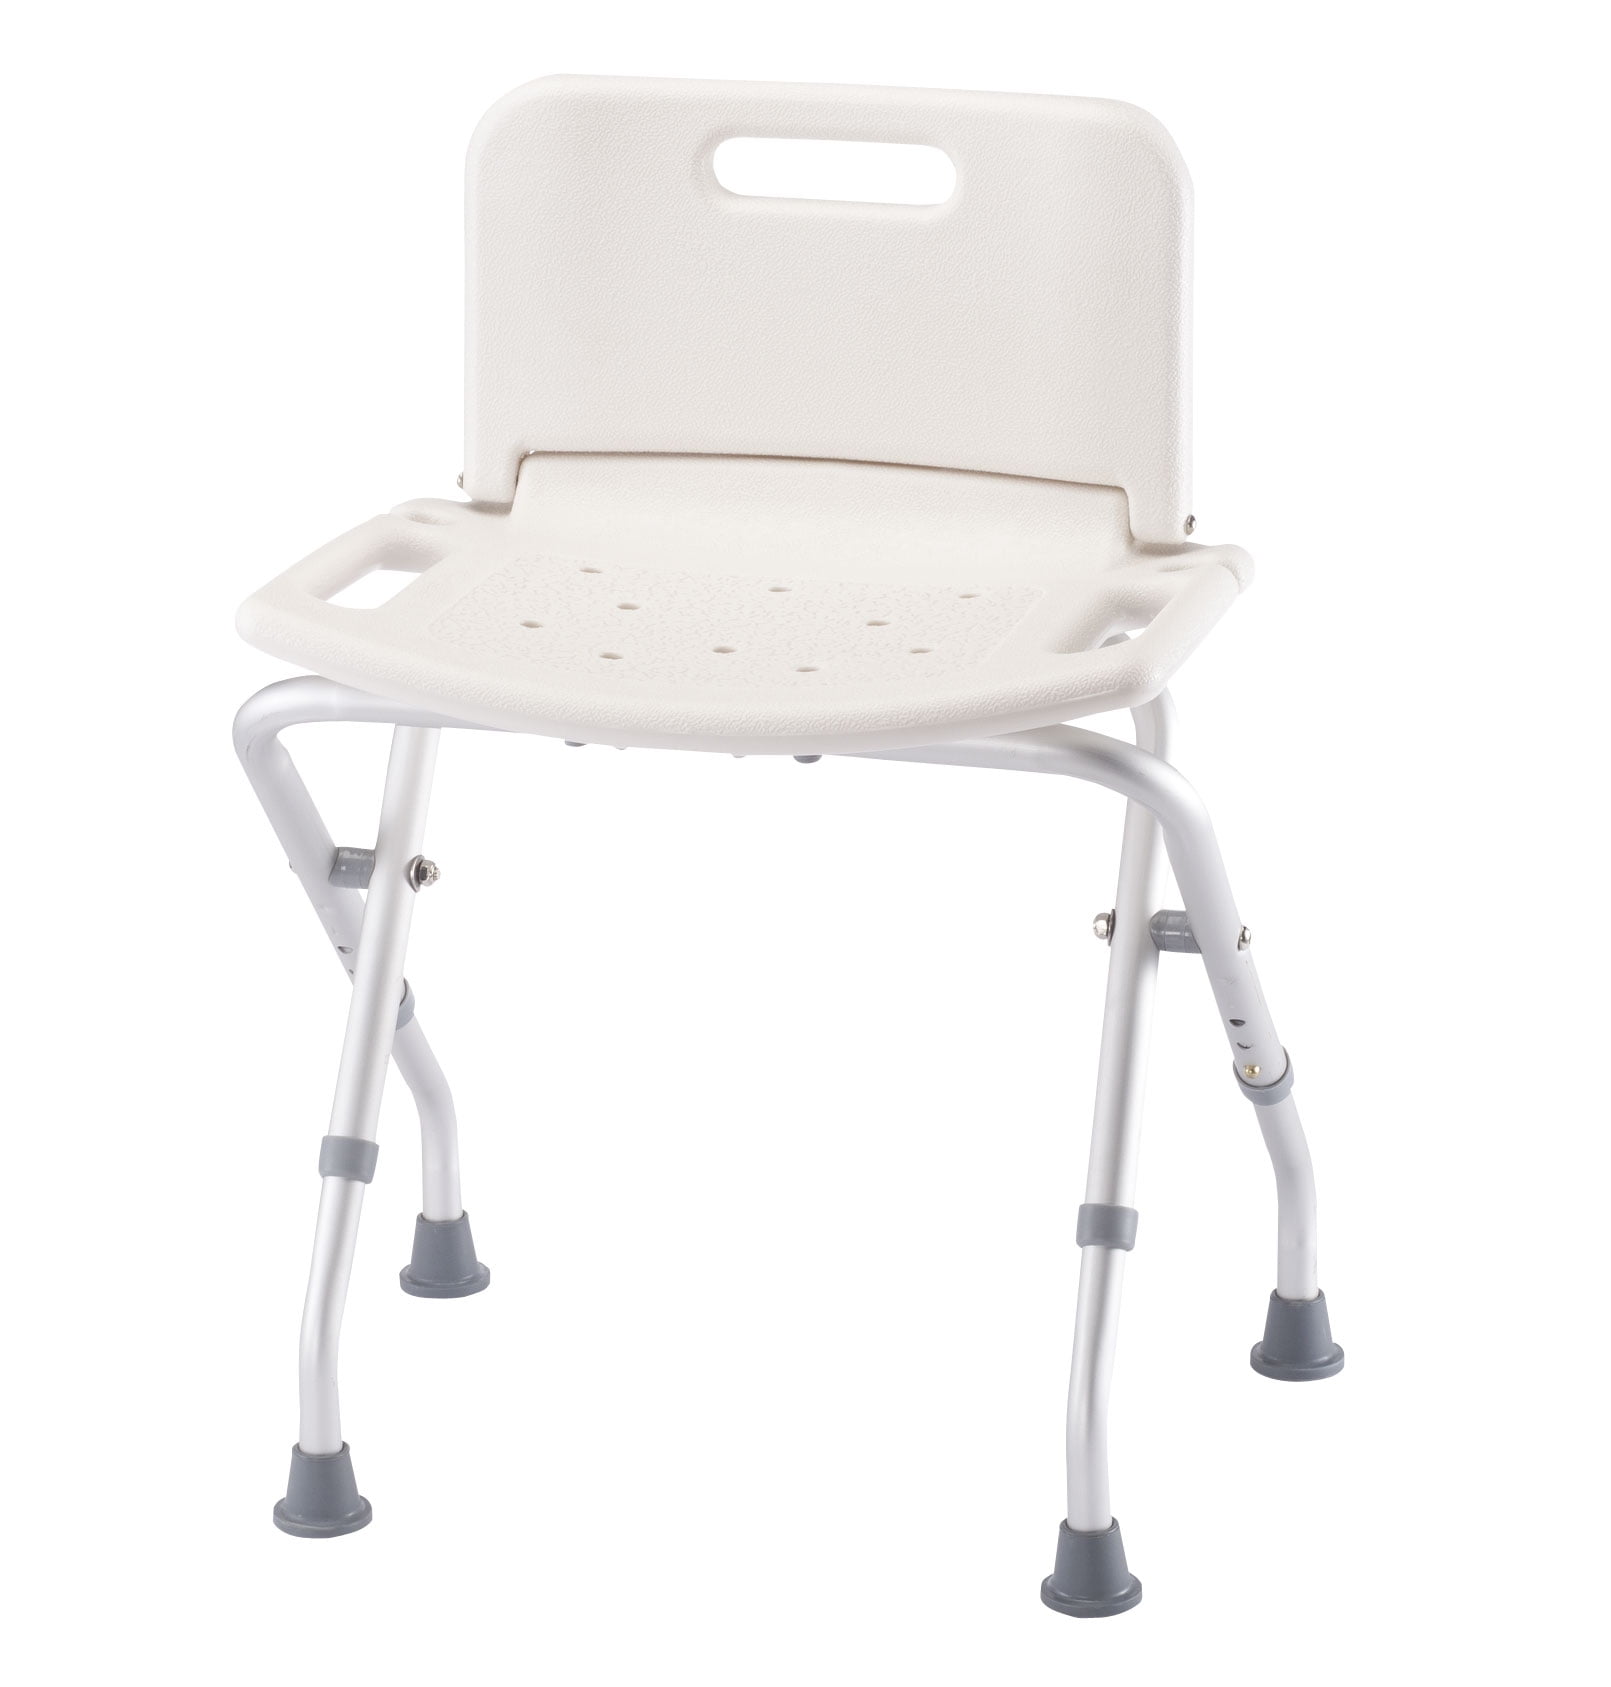 folding chair with back support